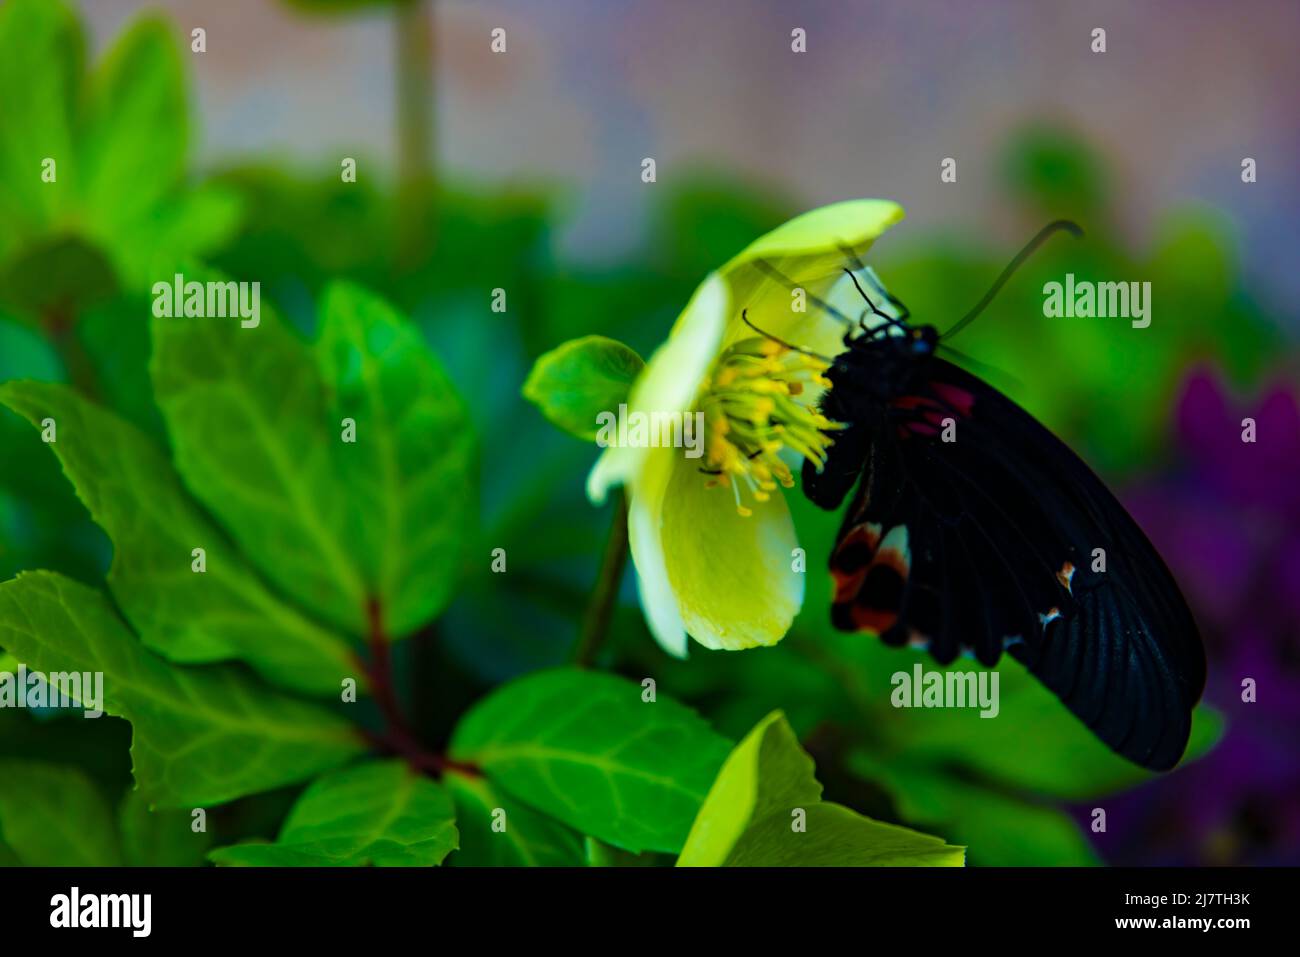 A black butterfly on the flower in the garden daytime Stock Photo